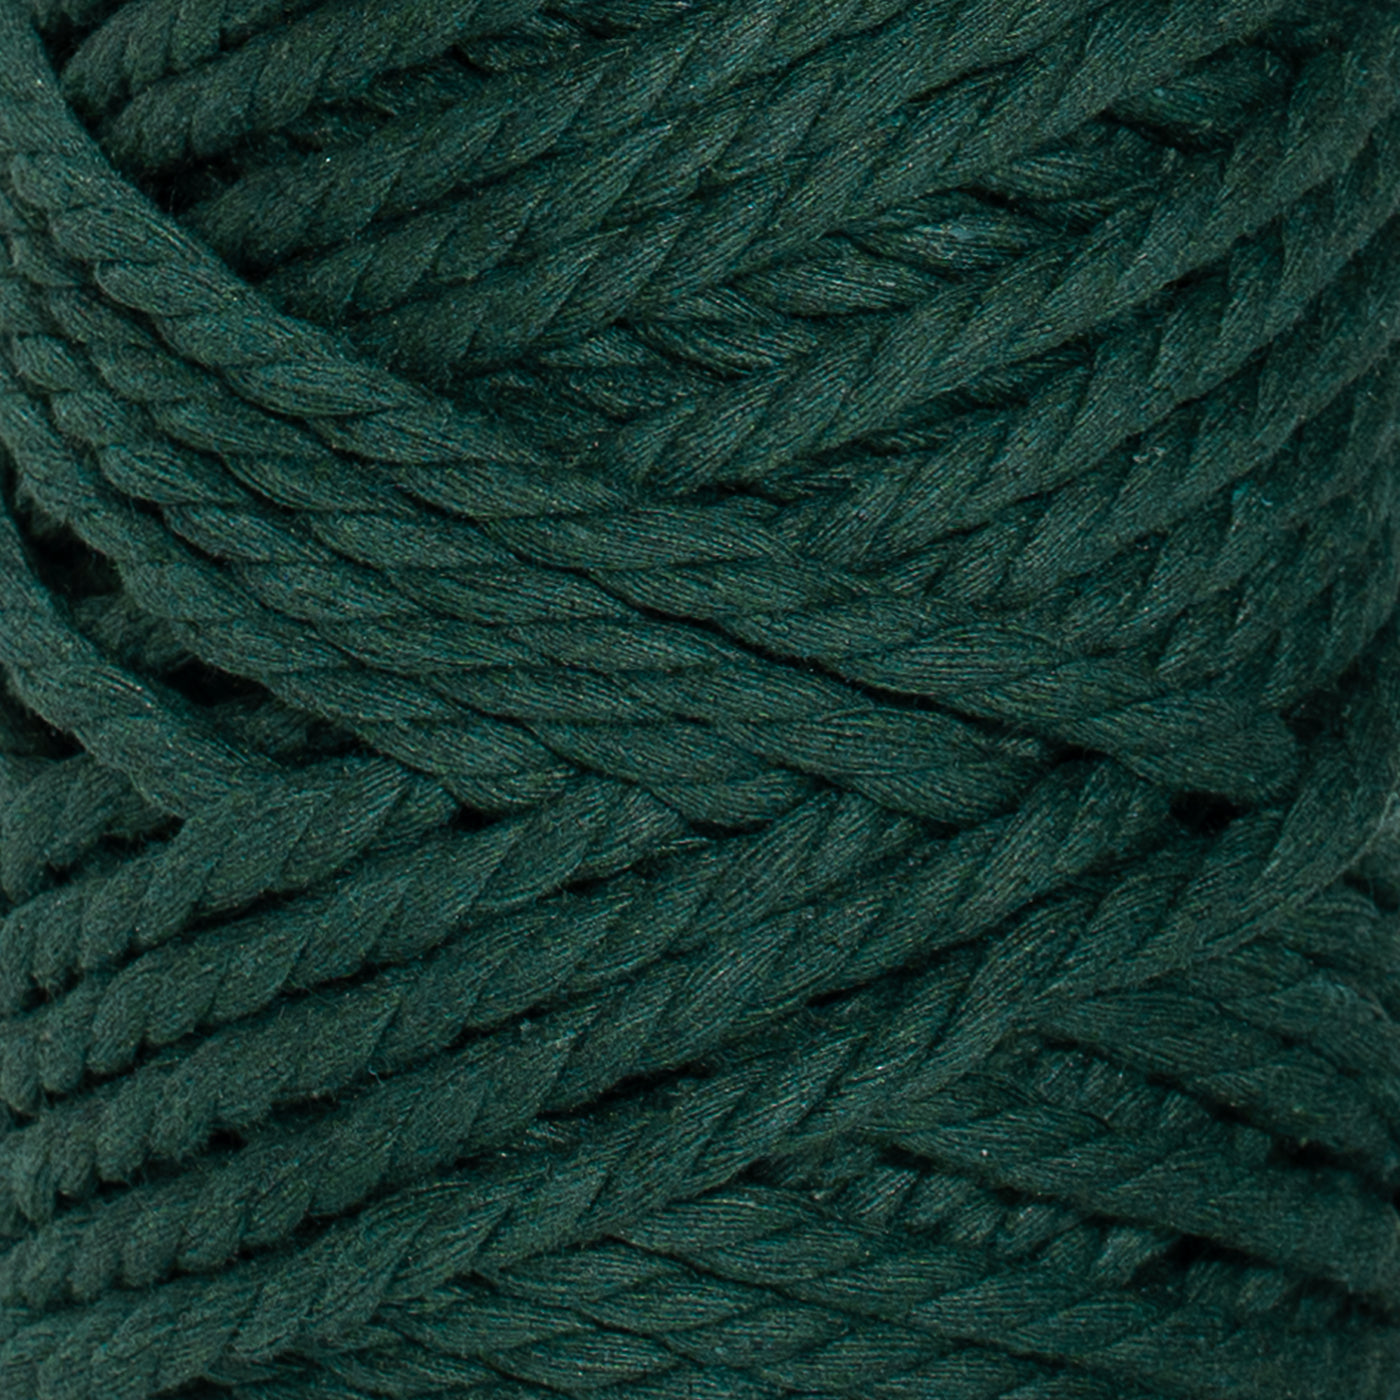 COTTON ROPE ZERO WASTE 5 MM - 3 PLY - FOREST GREEN COLOR